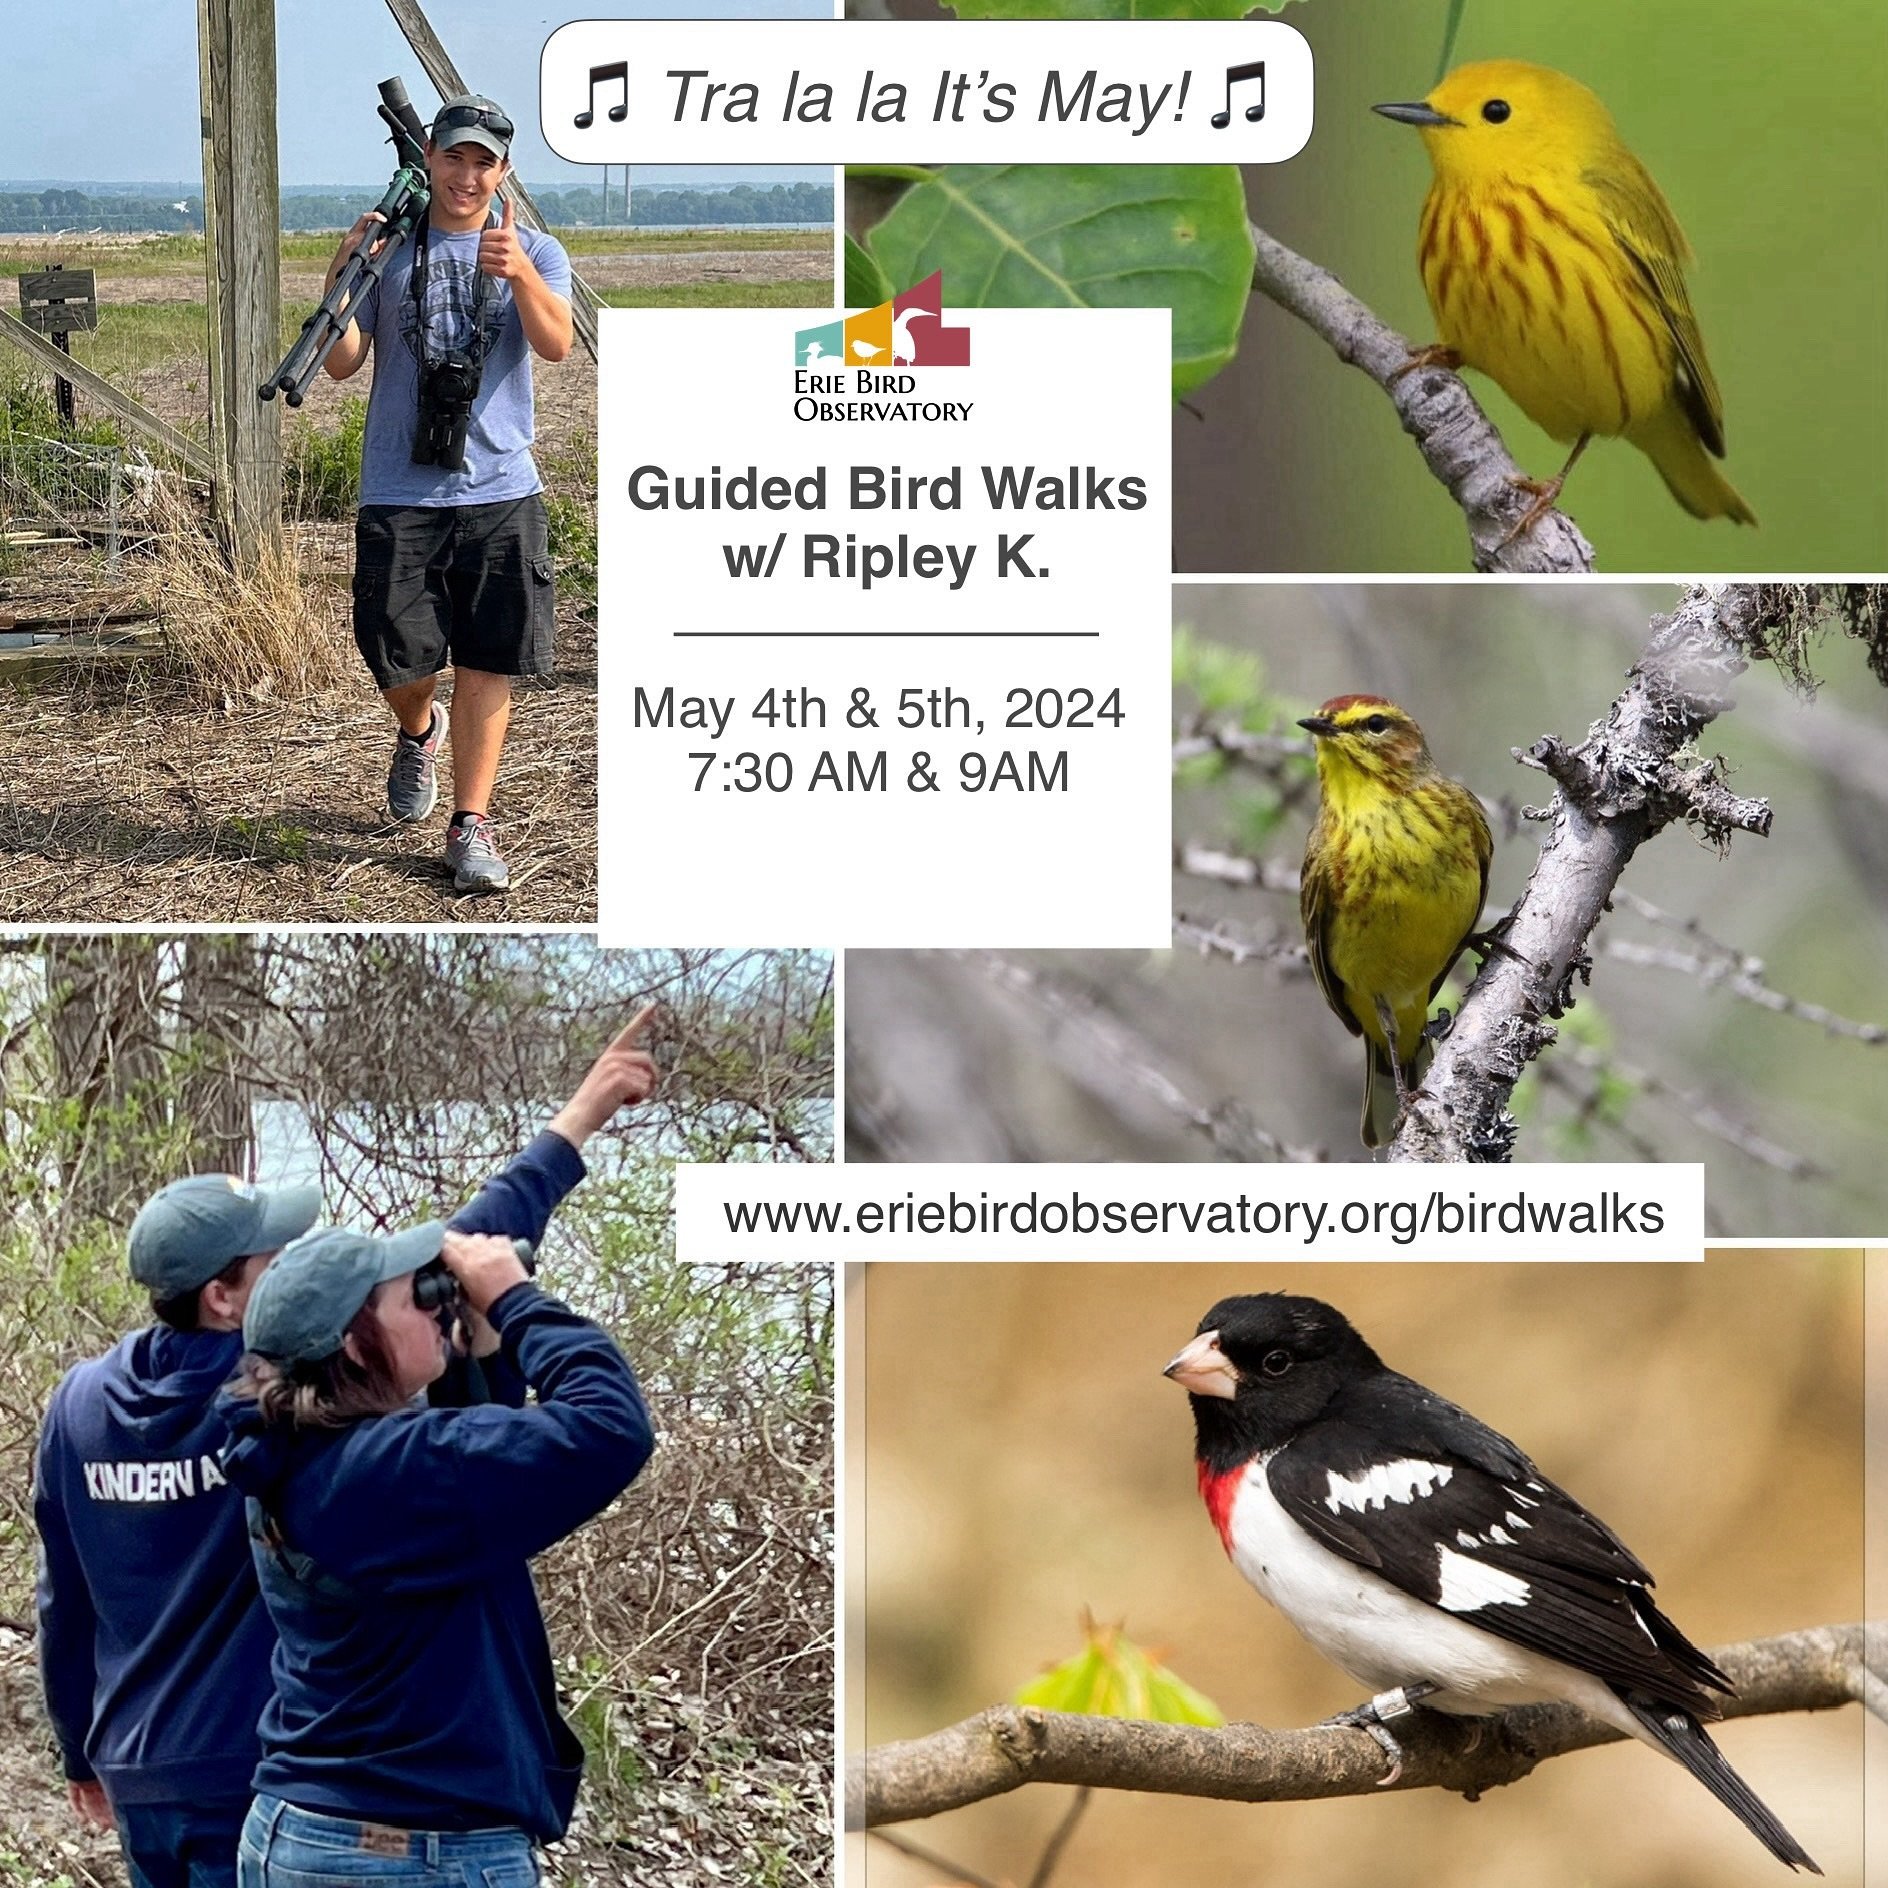 This is it, folks, the month we&rsquo;ve all been waiting for! Known for its amazing migration, May brings waves of #birds to our parks and yards. And to help kick off this most joyous time of year, EBO is offering not one, not two, but FOUR Guided B